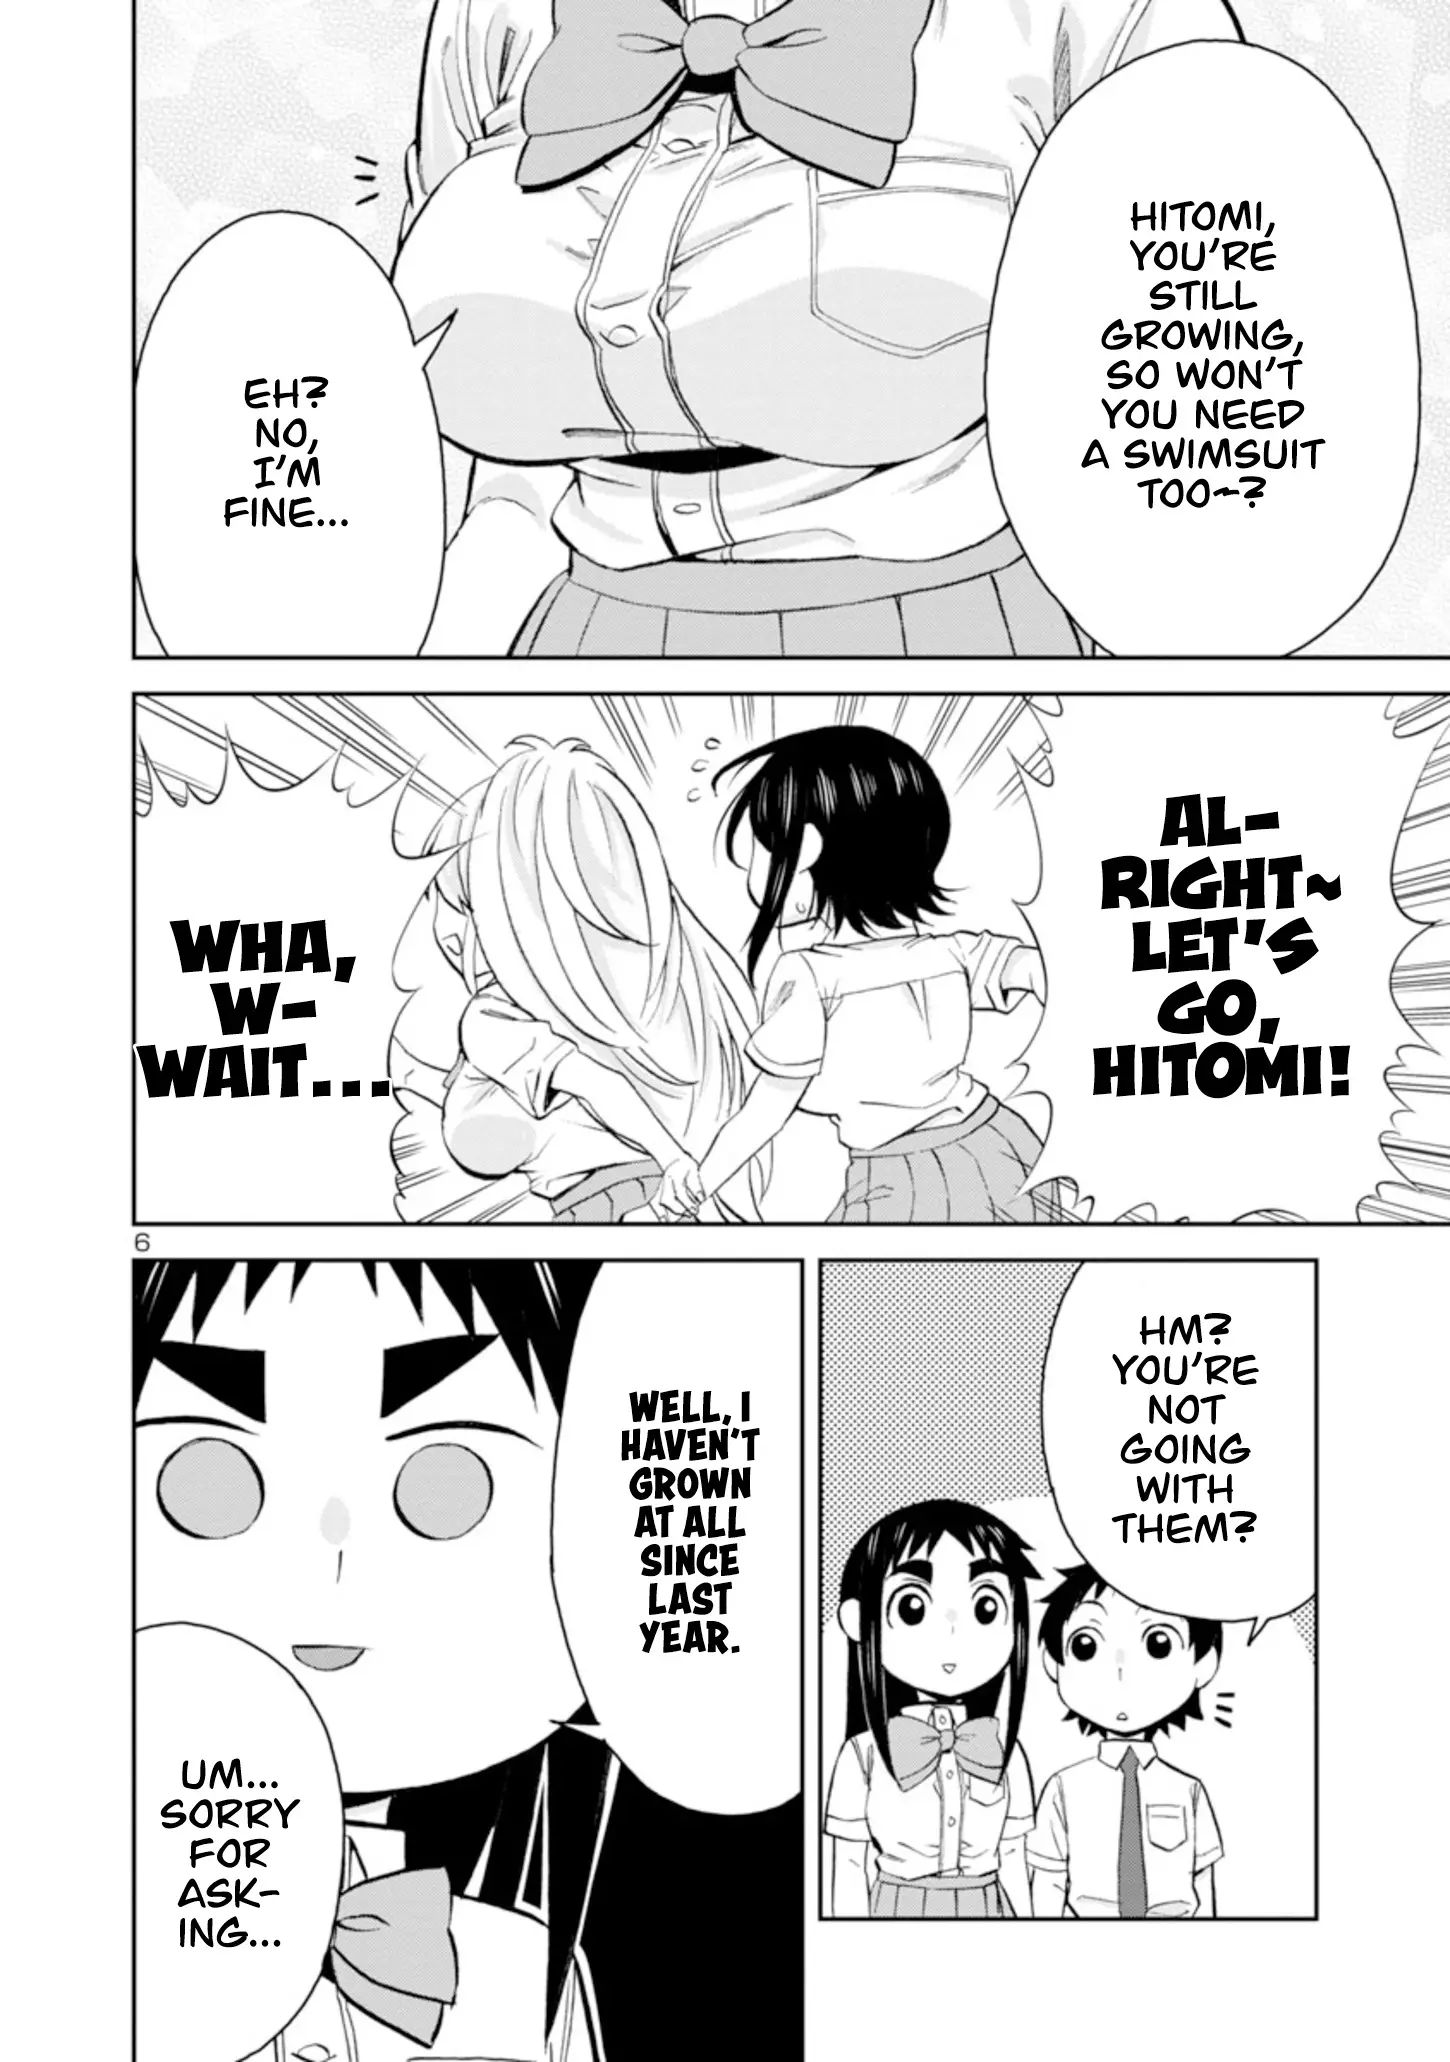 Hitomi-Chan Is Shy With Strangers - 94 page 7-e53c45ef